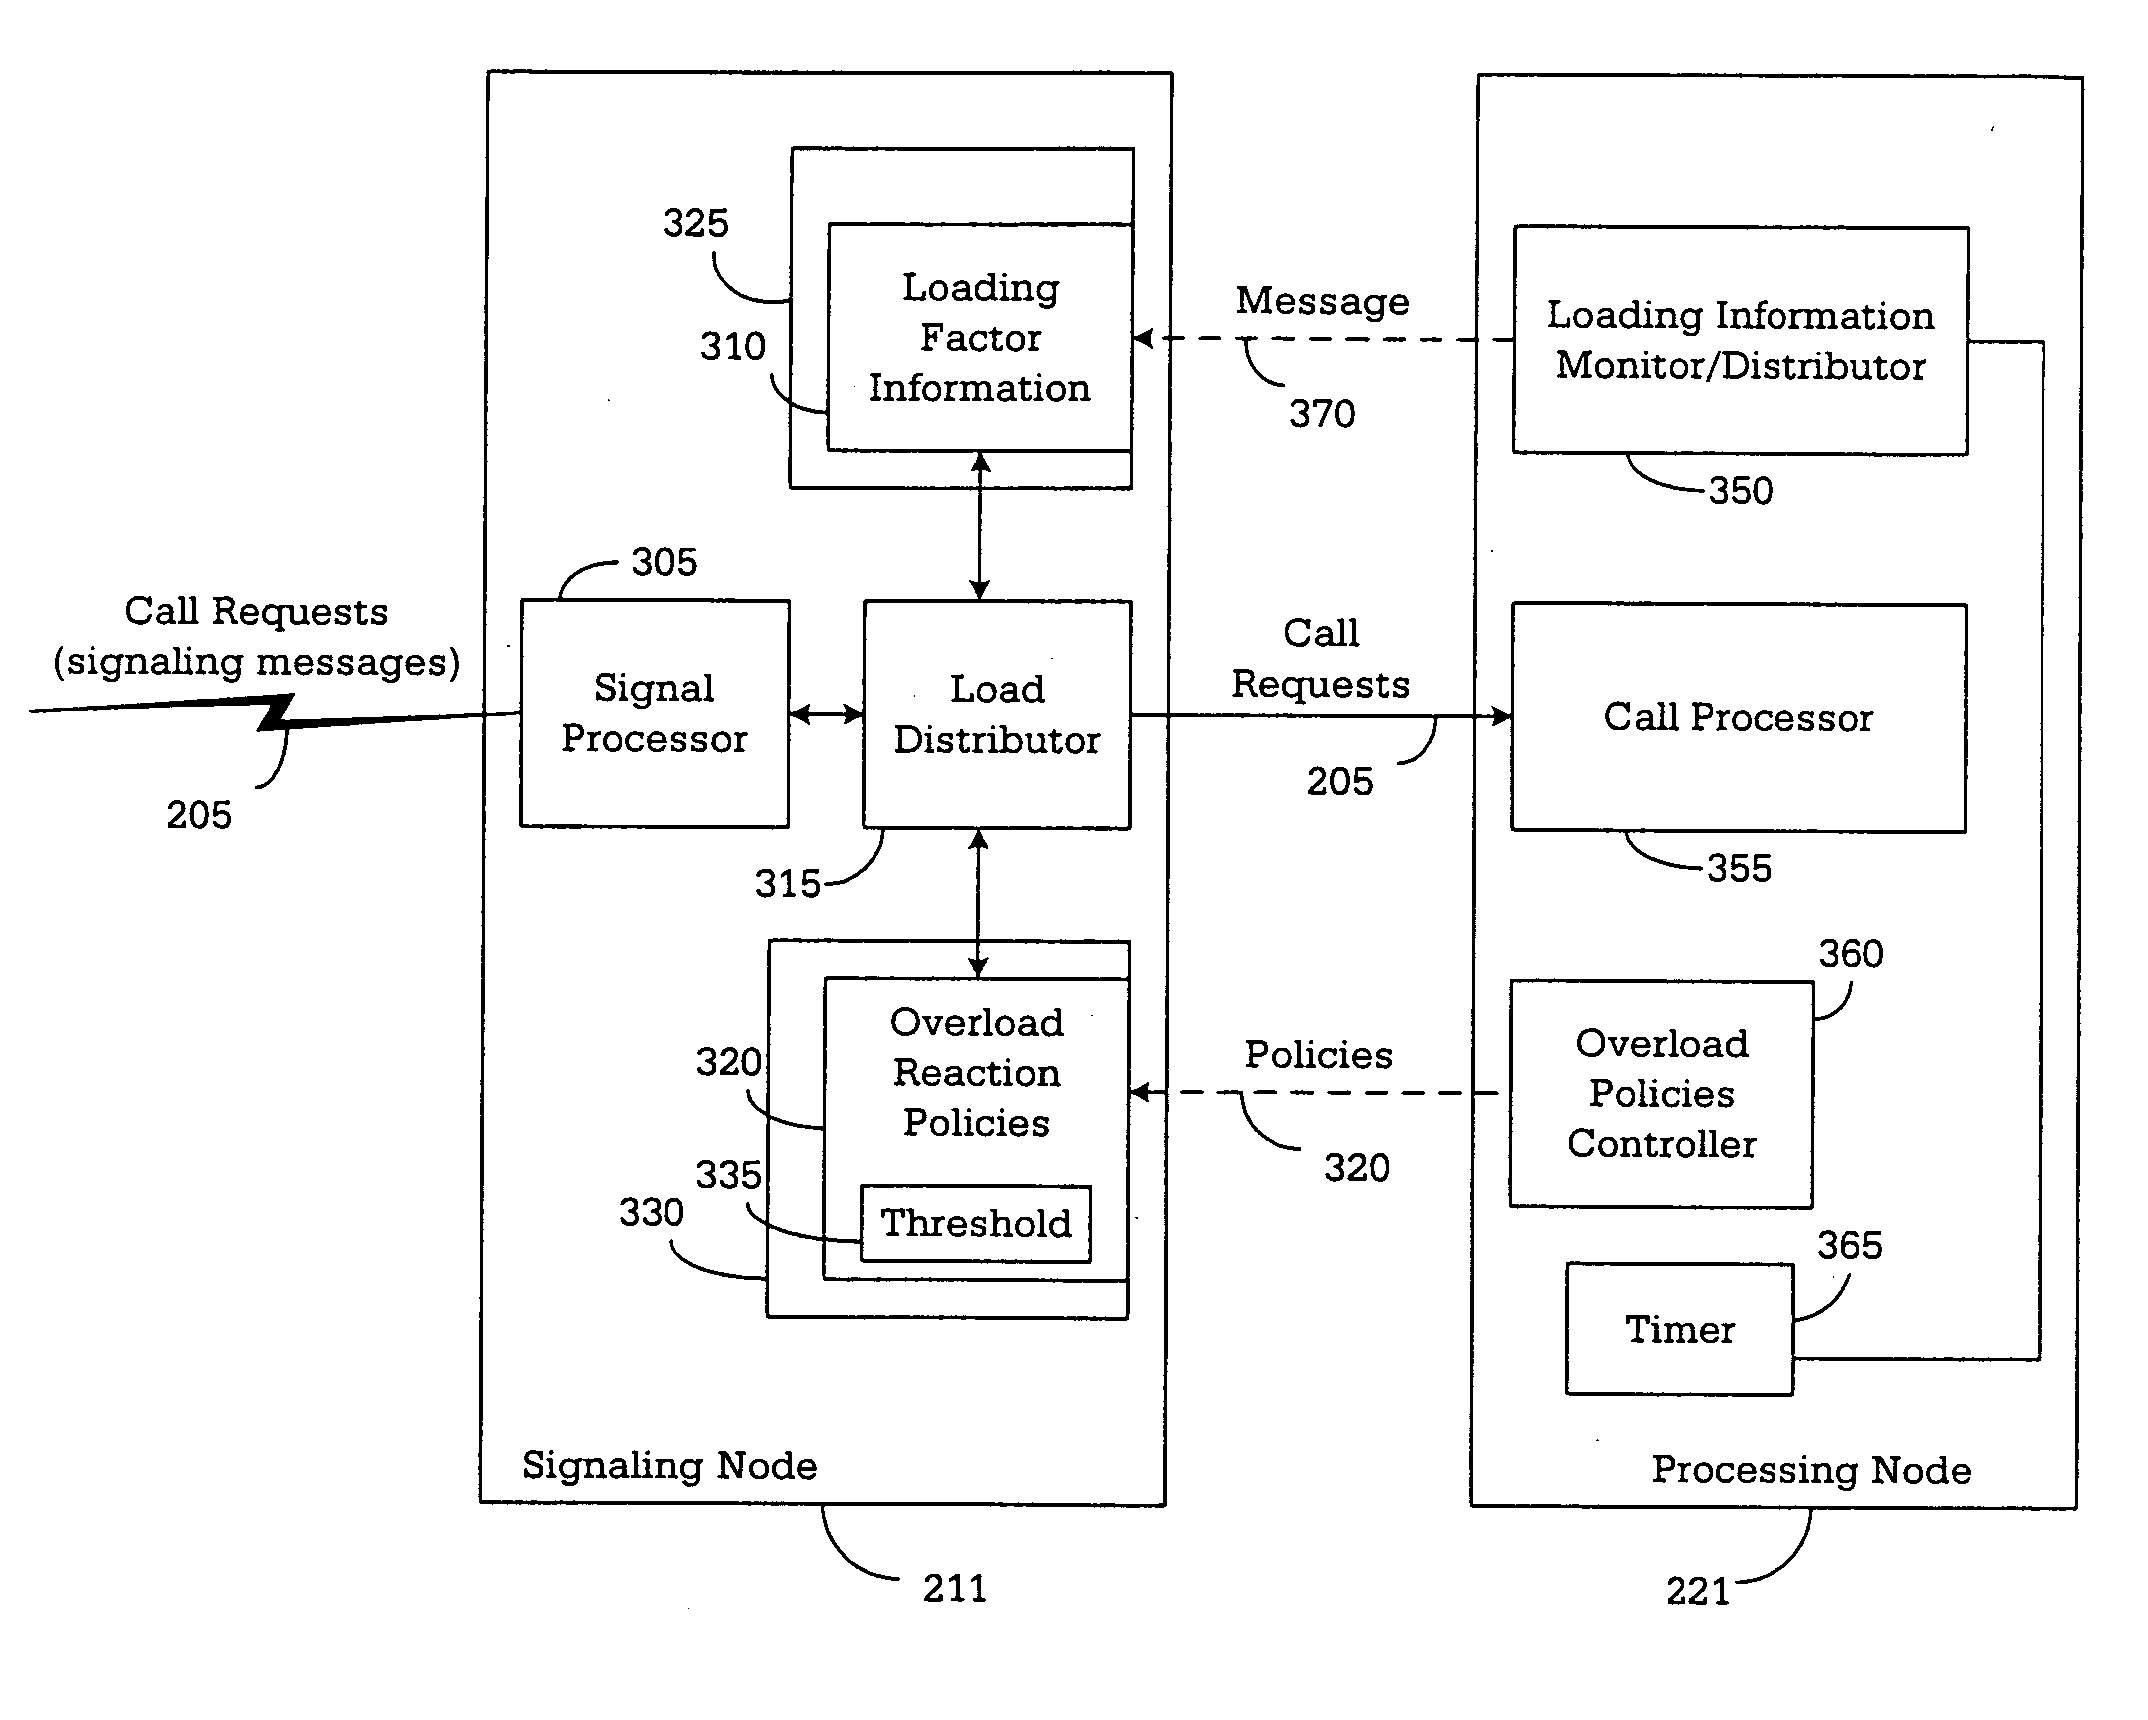 Apparatus and method for real-time overload control in a distributed call-processing environment